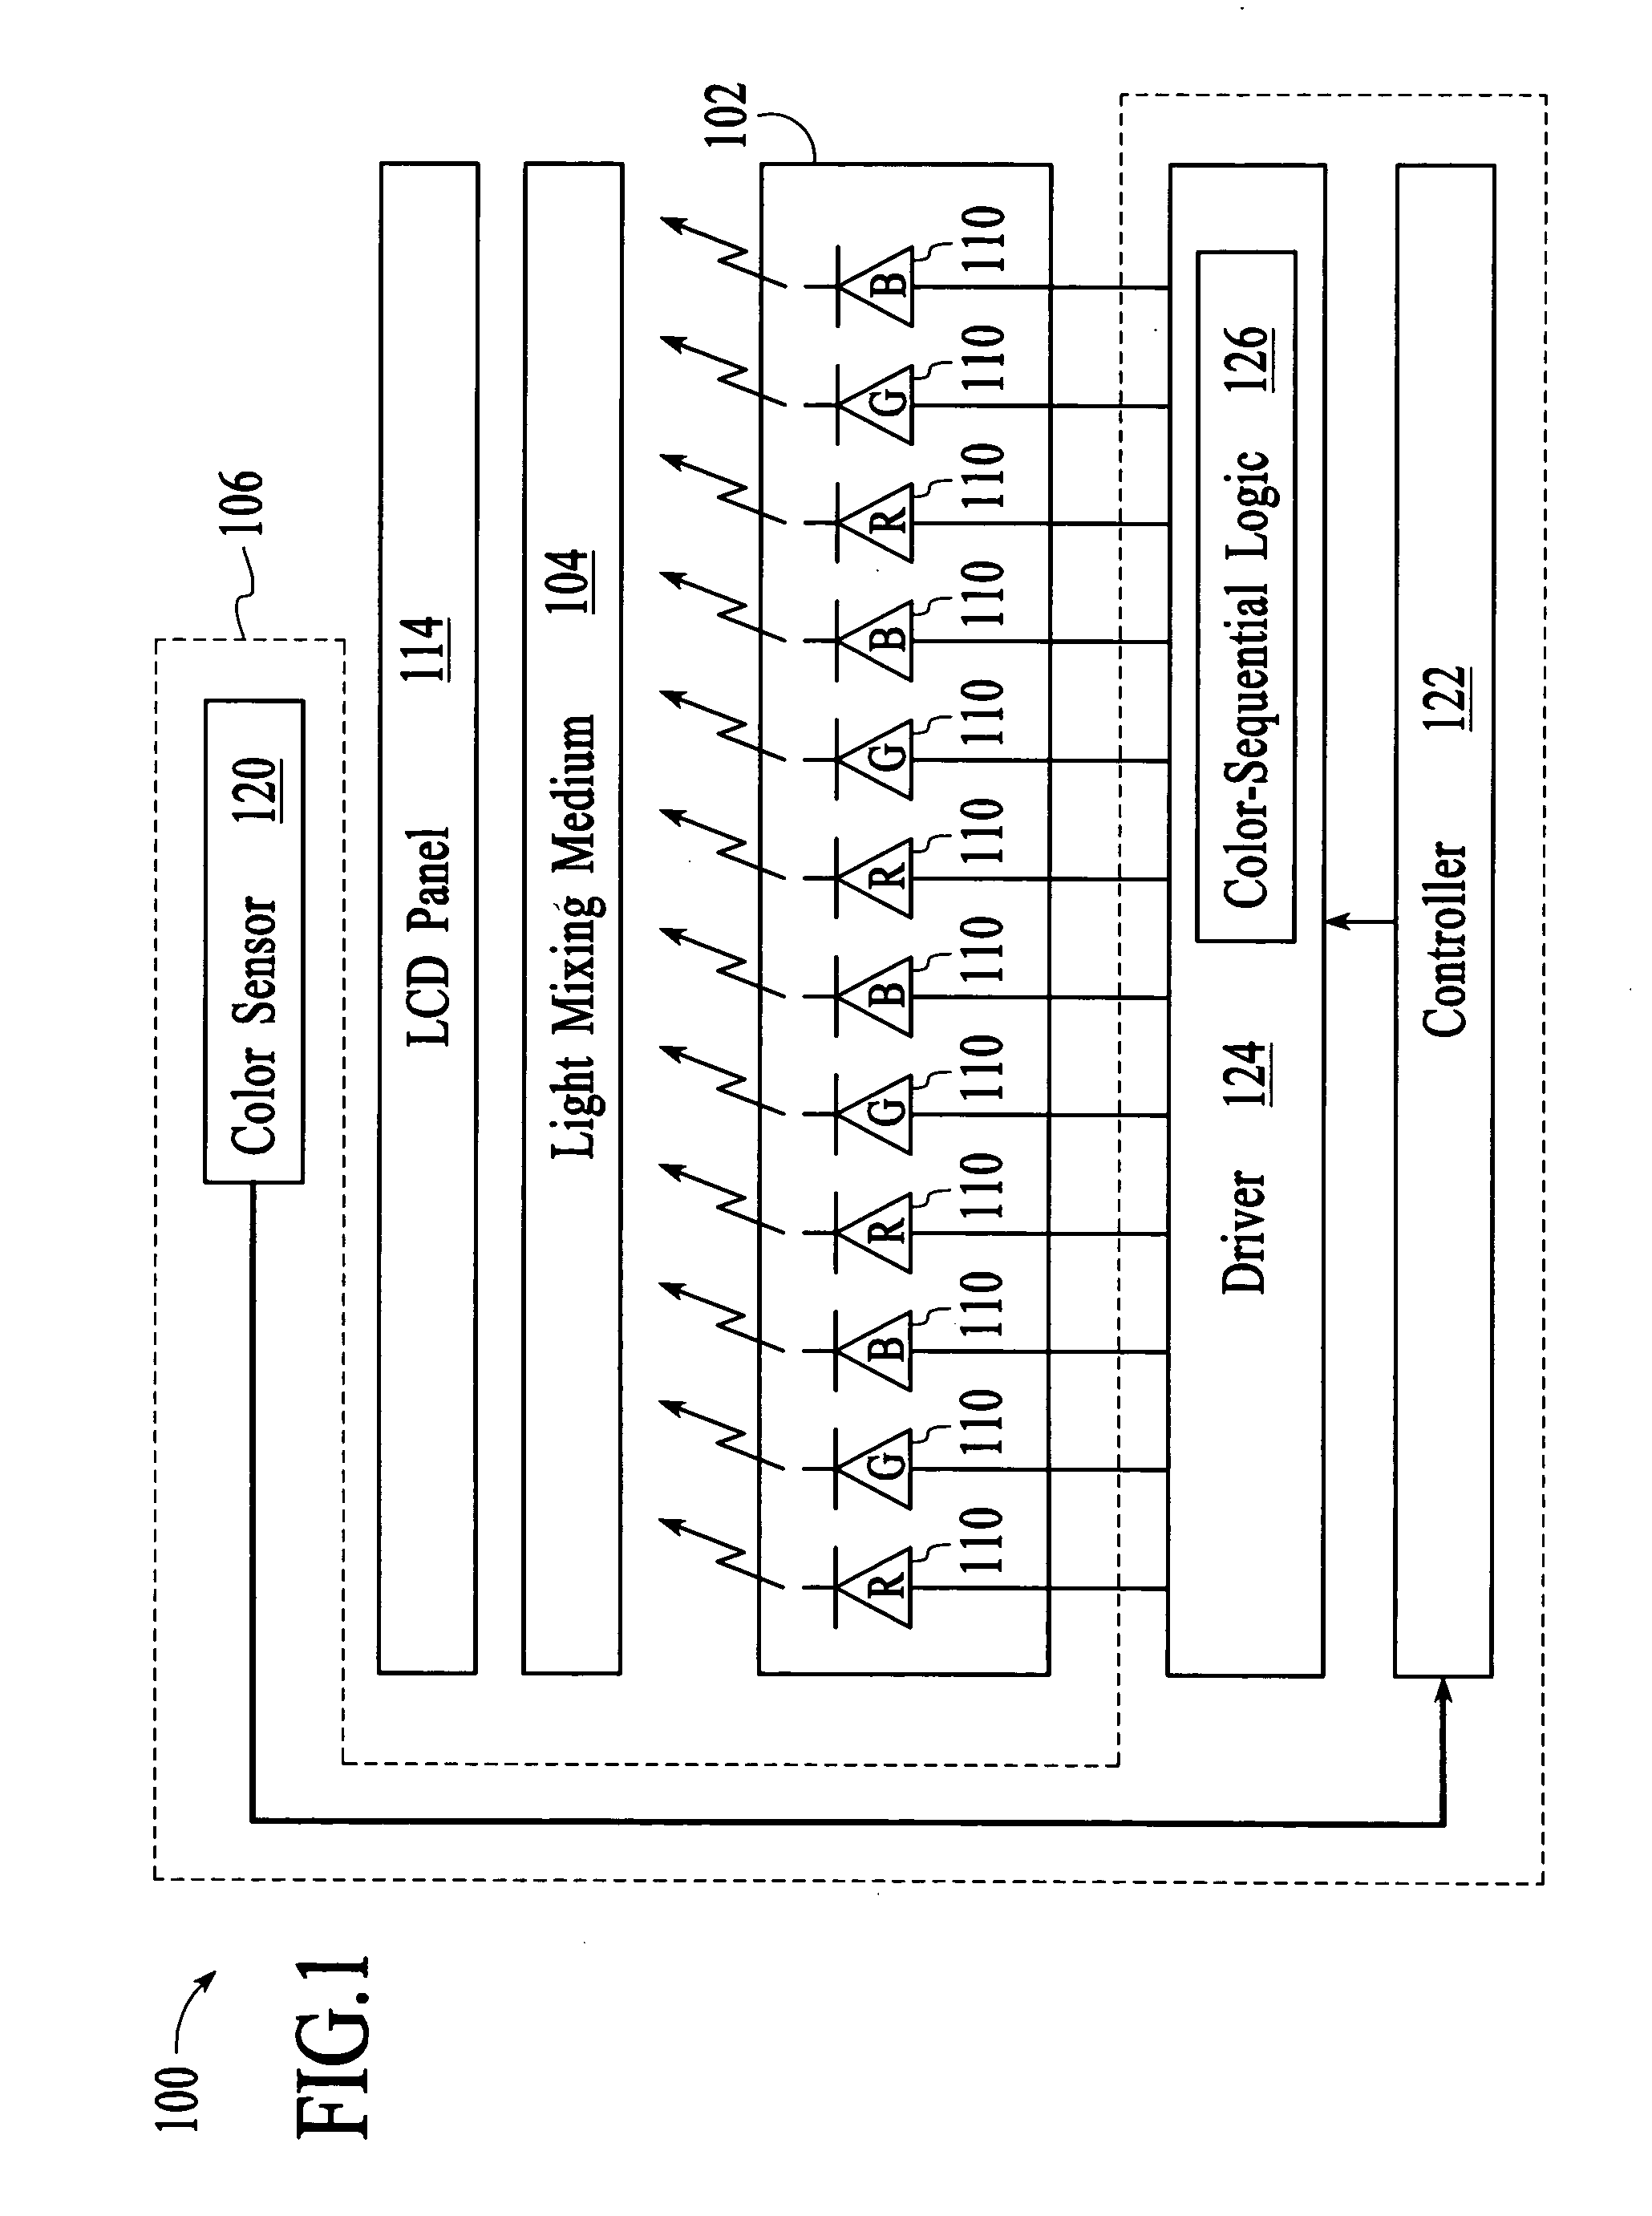 Field-sequential color display with feedback control